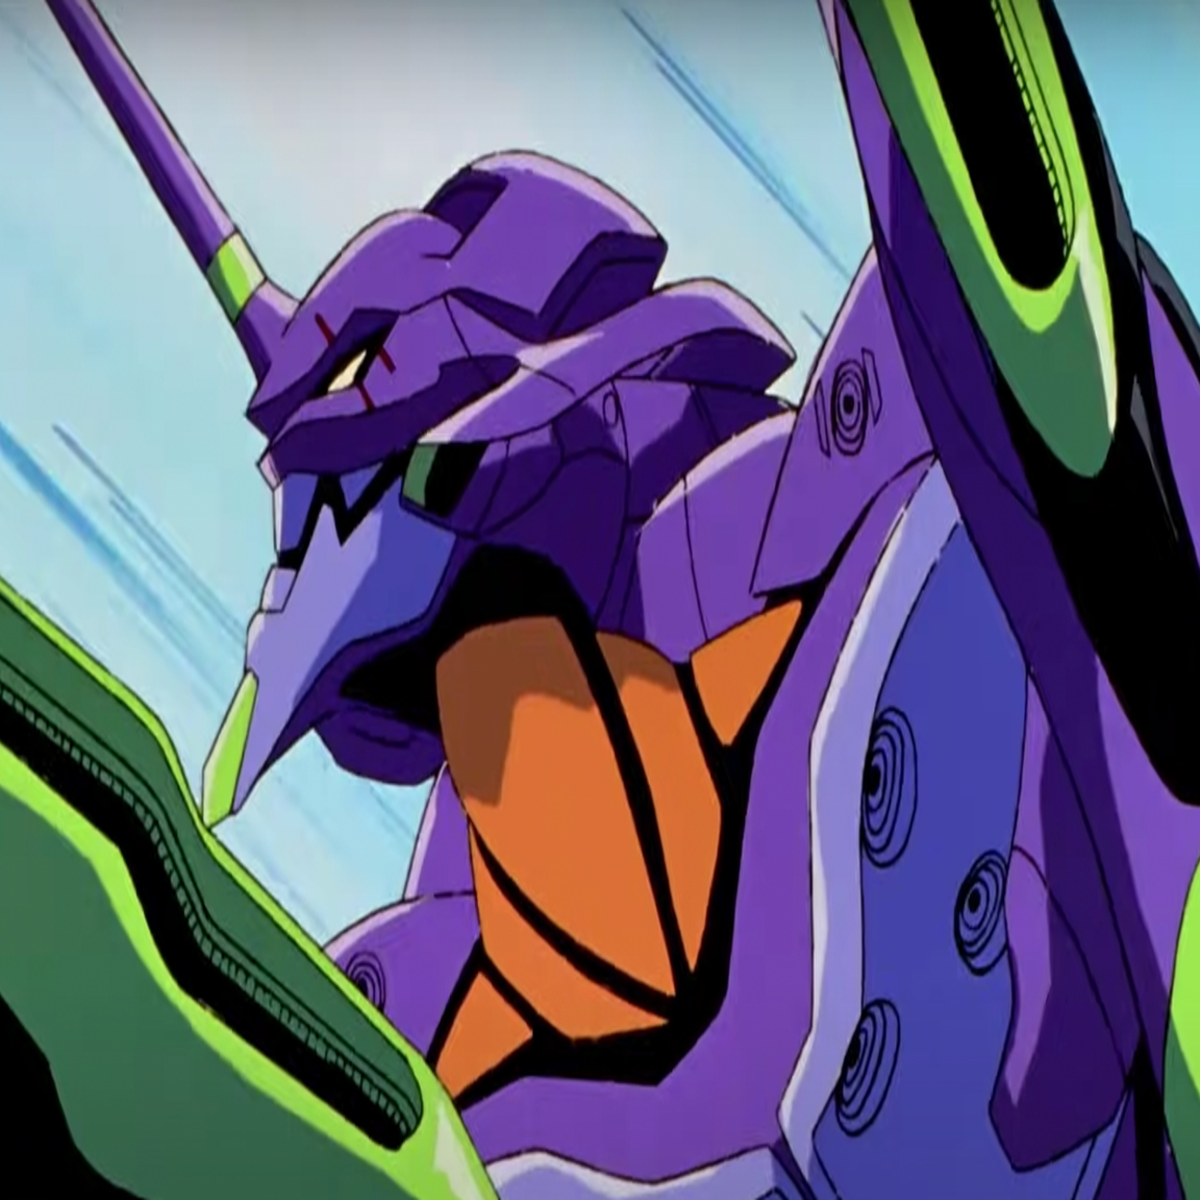 How to watch the Neon Genesis Evangelion anime series in order